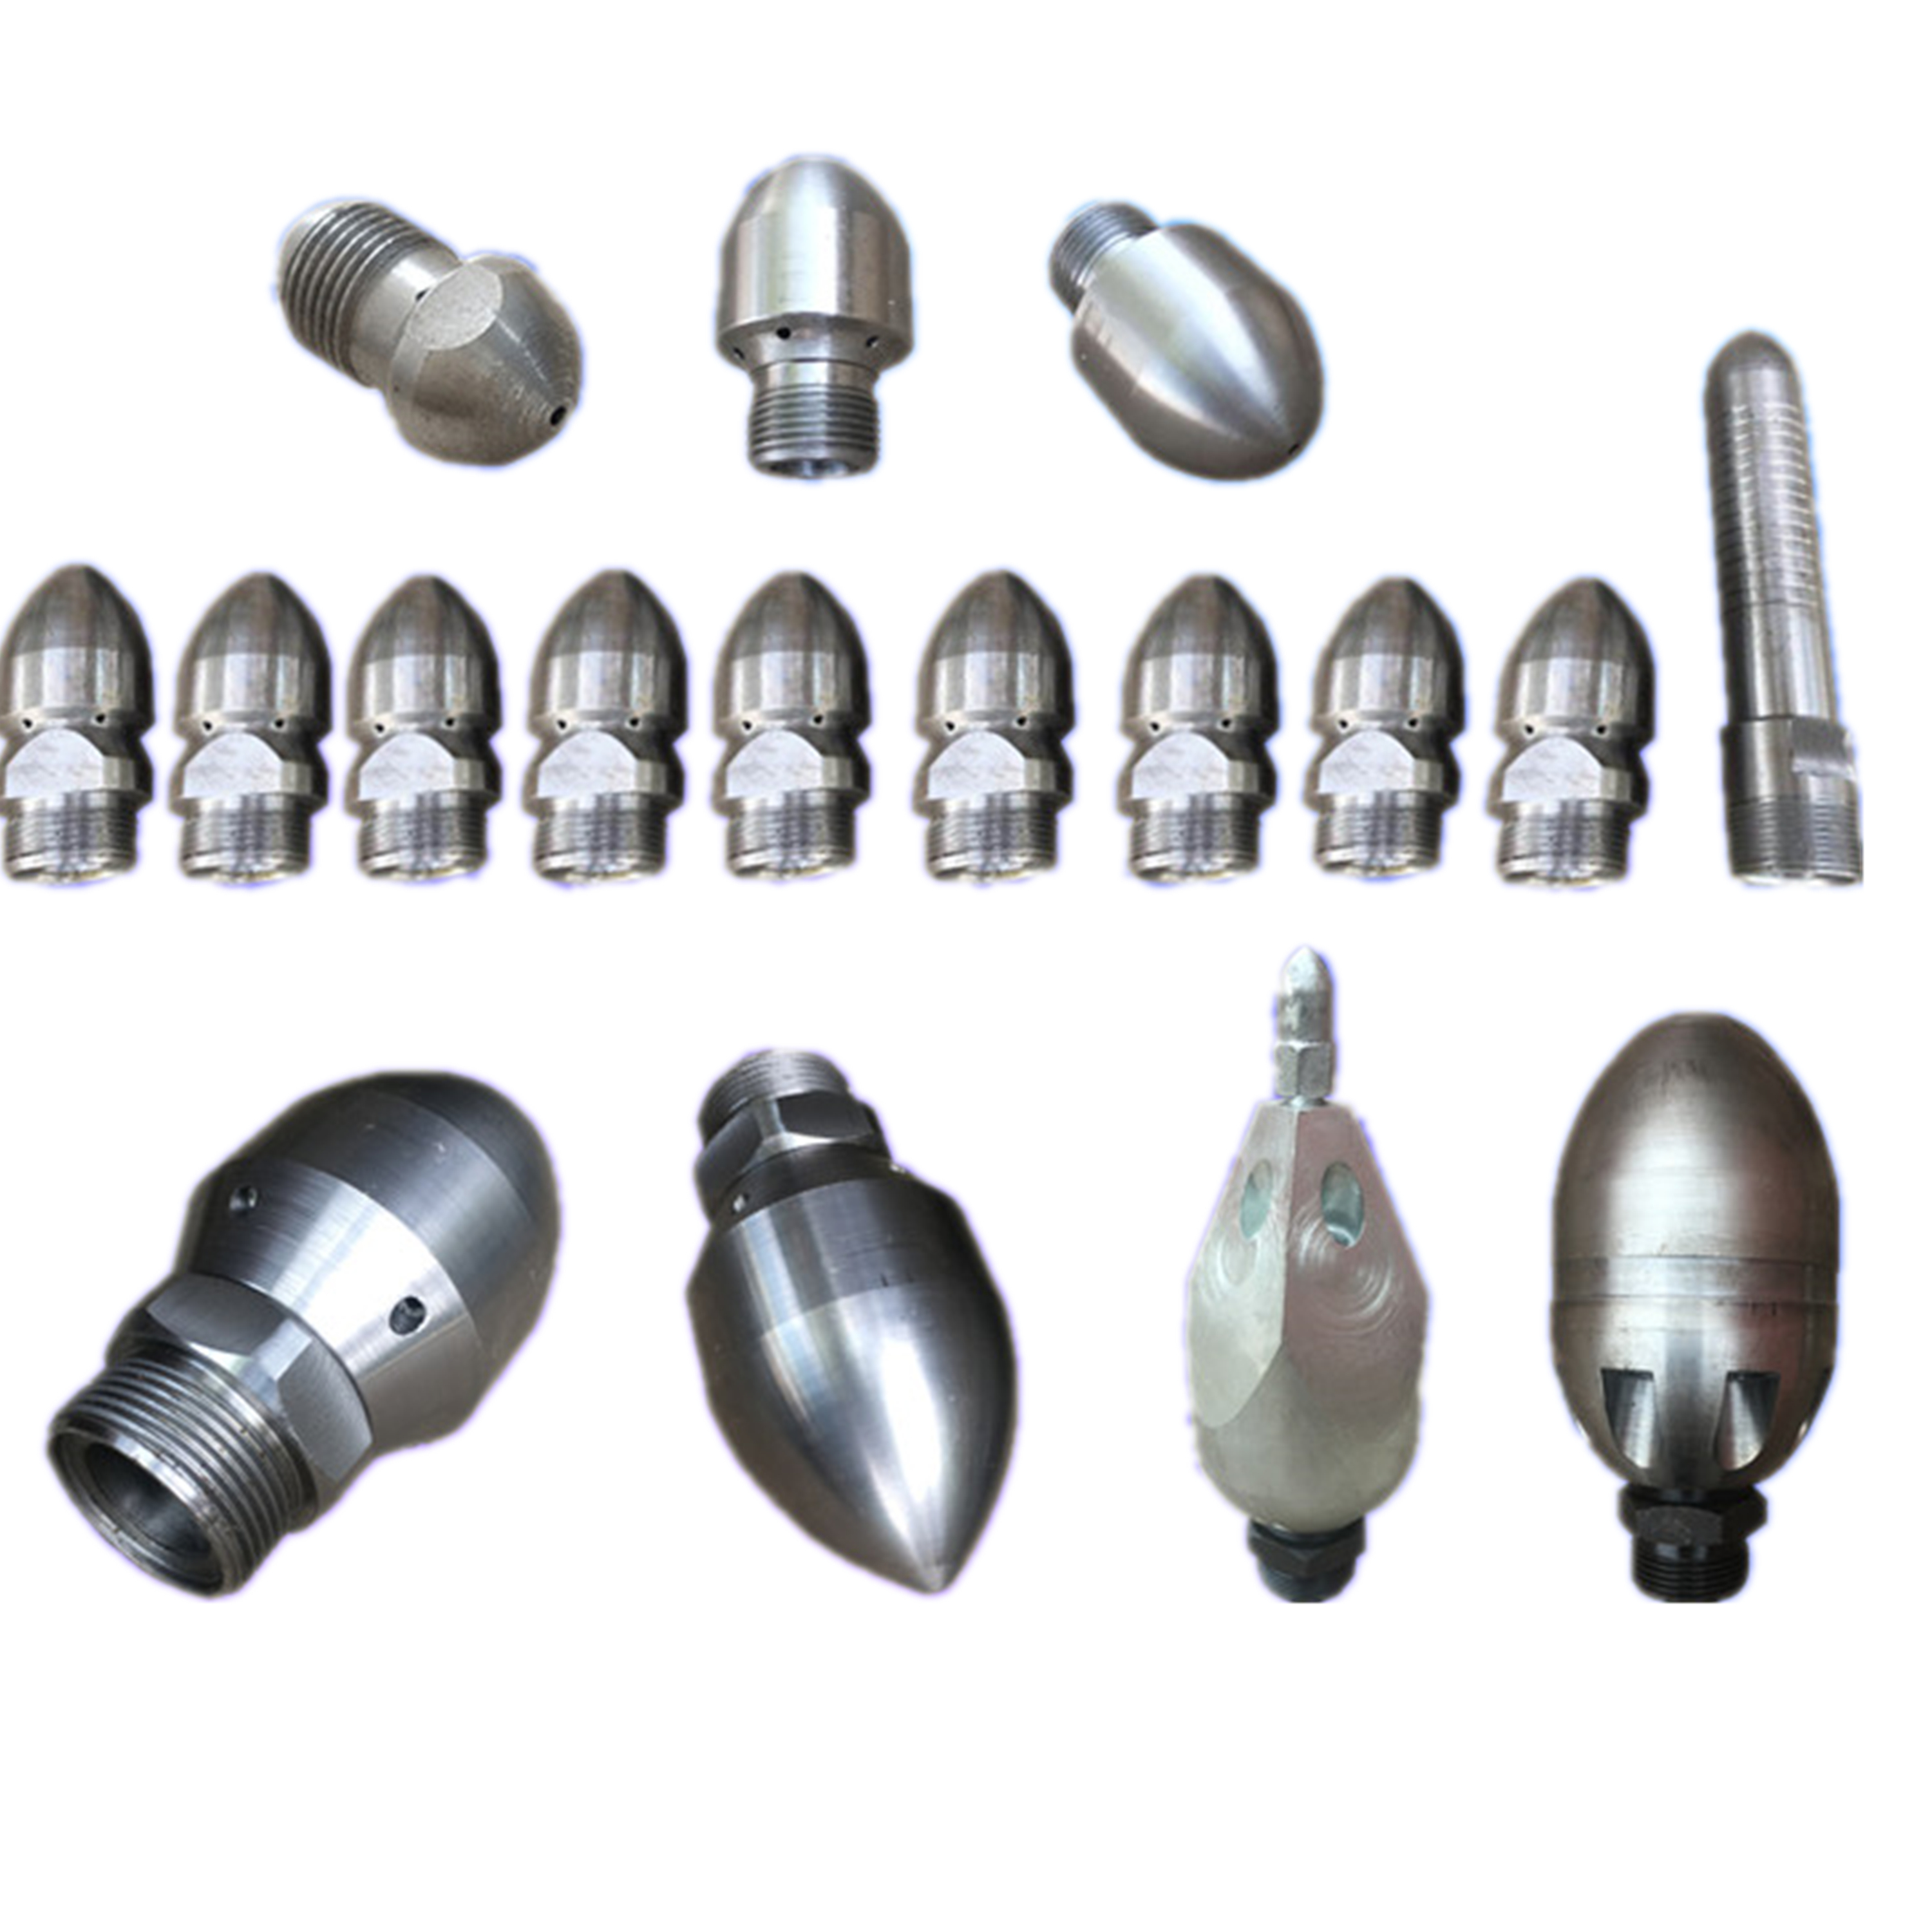 High-Pressure Jetter Cleaning Sewer Drain Jetting Nozzel Ceramic Nozzles Price List